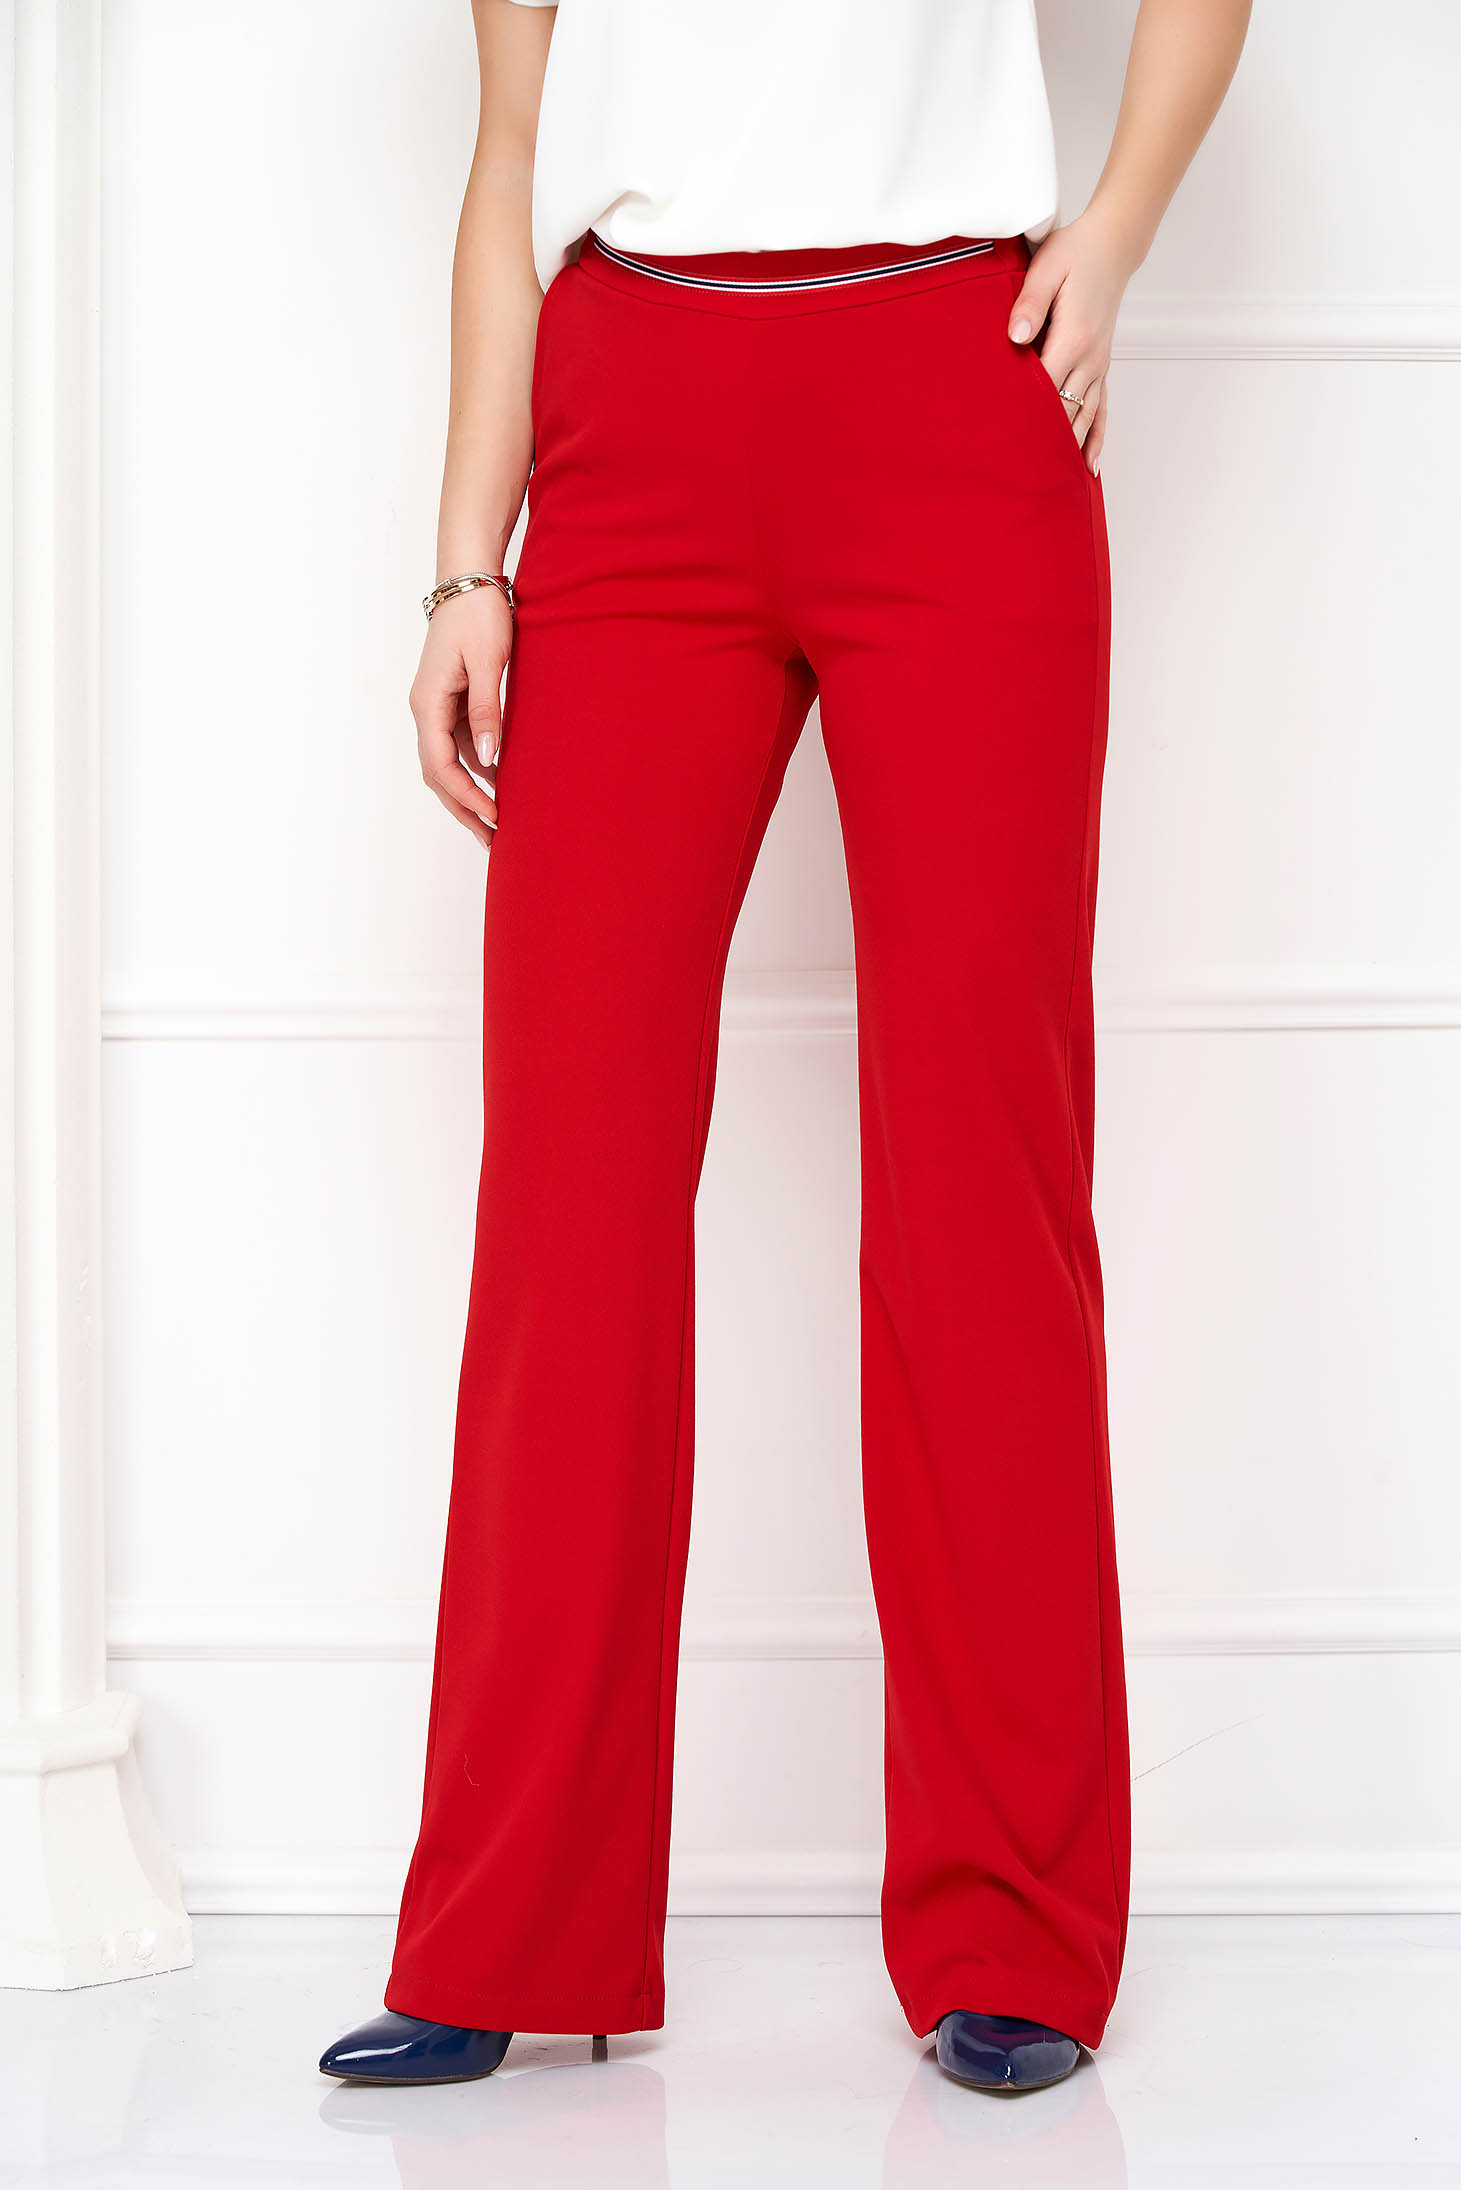 Red Flared Long Crepe Pants with Pockets - StarShinerS 1 - StarShinerS.com